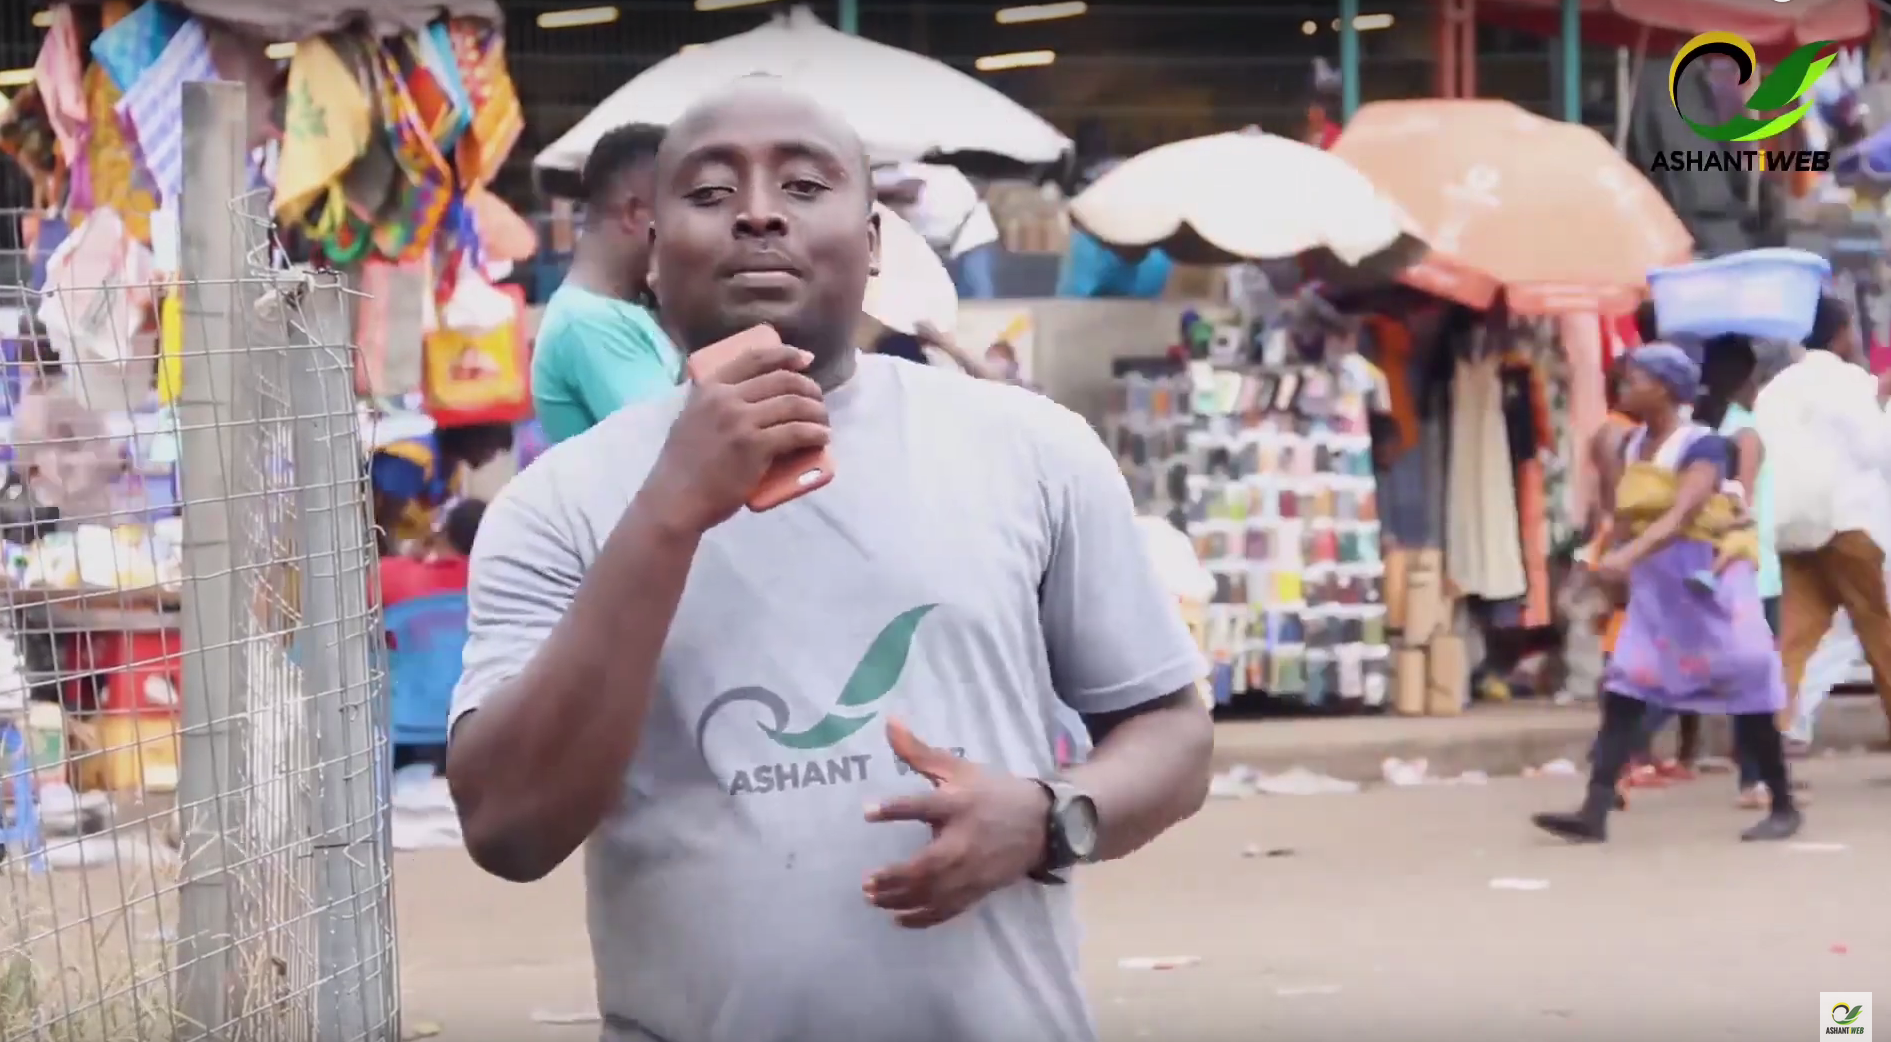 Ashantiweb street interview! Let's take thoughts from the streets of Kumasi.#ashantiweb